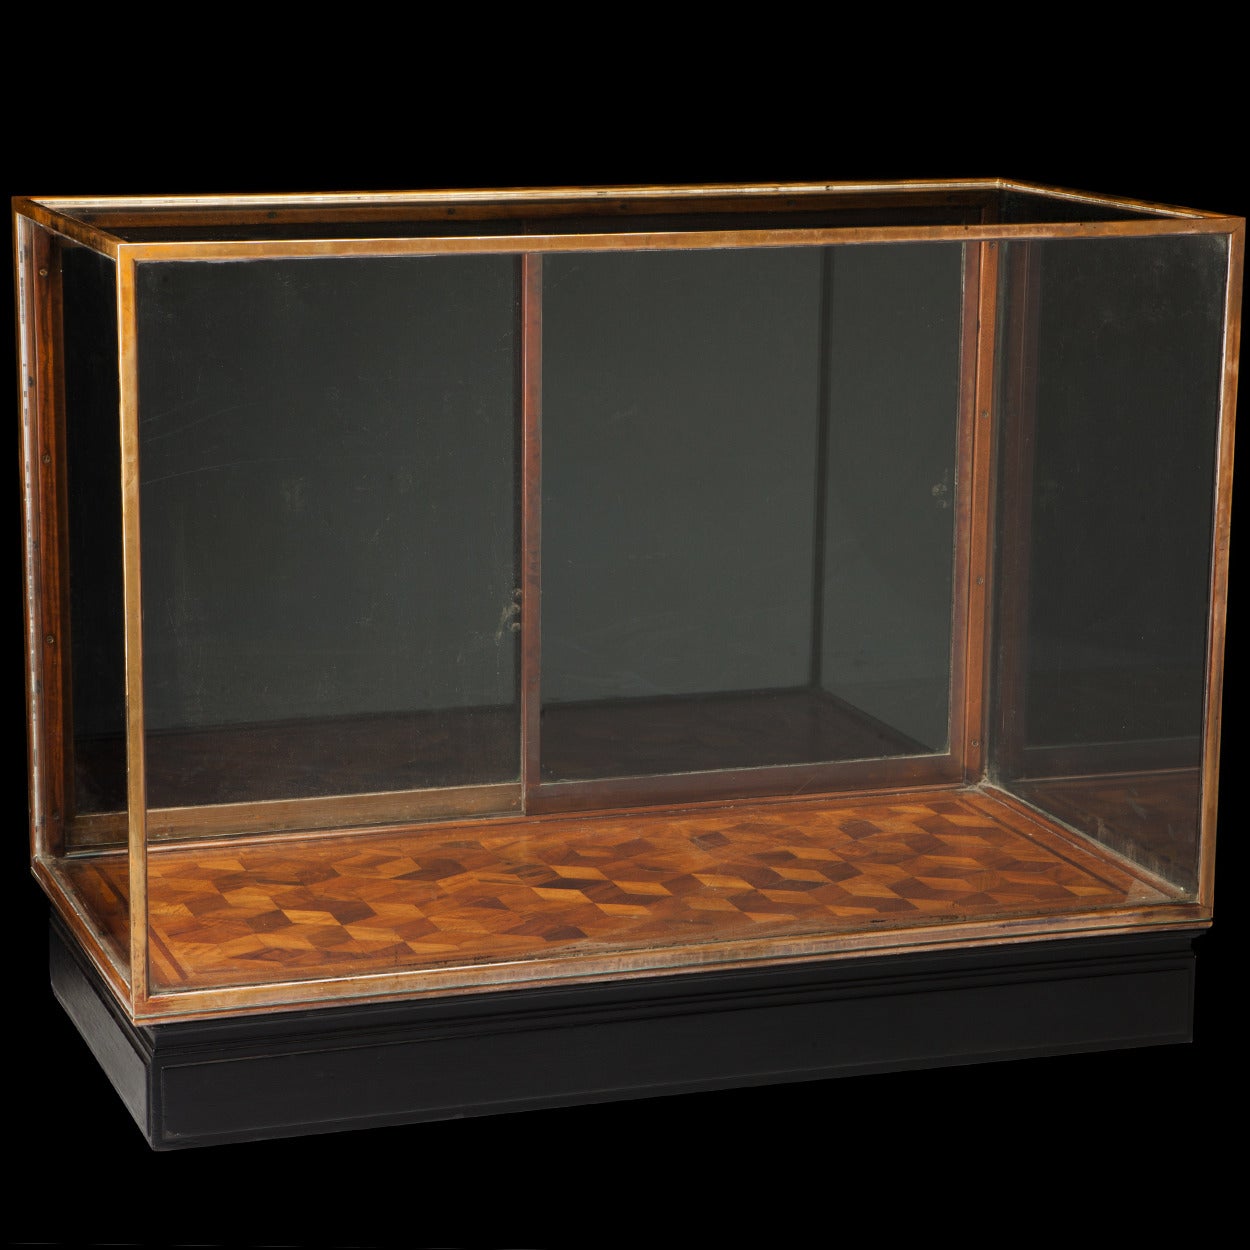 Copper frame with marquetry base, sitting atop original ebonized platform.

Made in England, circa 1920.